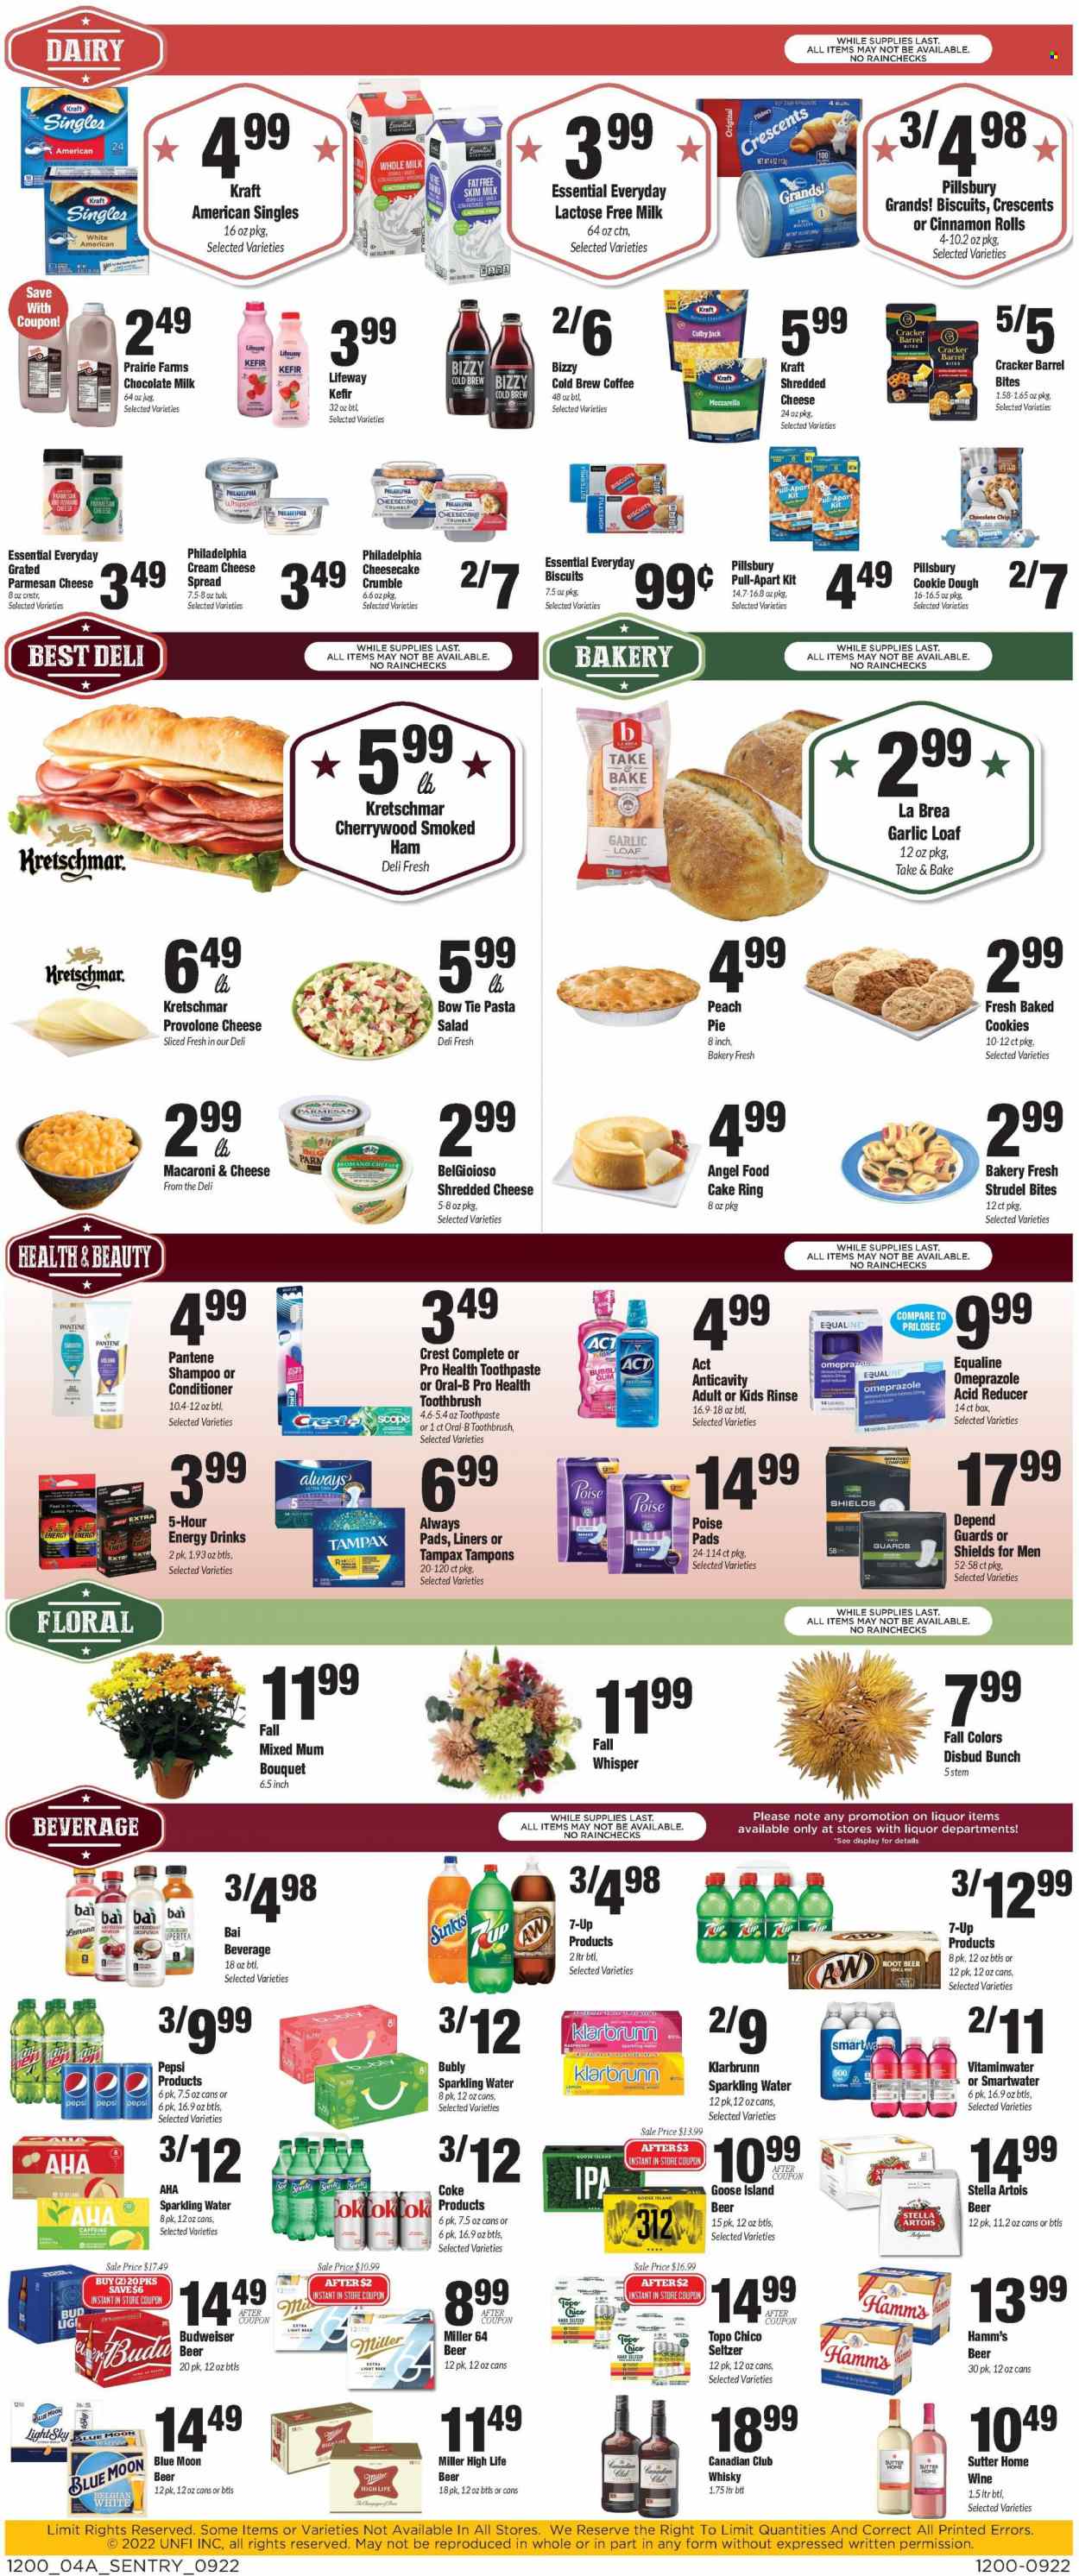 thumbnail - Sentry Foods Flyer - 09/22/2022 - 09/28/2022 - Sales products - cake, pie, strudel, cinnamon roll, Angel Food, garlic, ginger, salad, macaroni & cheese, pasta, Pillsbury, Kraft®, ham, smoked ham, cheese spread, pasta salad, Colby cheese, cream cheese, mozzarella, sandwich slices, shredded cheese, Philadelphia, parmesan, Kraft Singles, Provolone, milk, lactose free milk, kefir, cookie dough, cookies, milk chocolate, crackers, biscuit, Coca-Cola, Sprite, Pepsi, energy drink, 7UP, Bai, sparkling water, Smartwater, green tea, tea, coffee, champagne, wine, liquor, Hard Seltzer, whisky, beer, Miller, IPA, shampoo, toothbrush, Oral-B, toothpaste, Crest, Tampax, Always pads, Whisper, tampons, conditioner, Pantene, Mum, BIC, bouquet, Budweiser, Stella Artois, Blue Moon. Page 4.